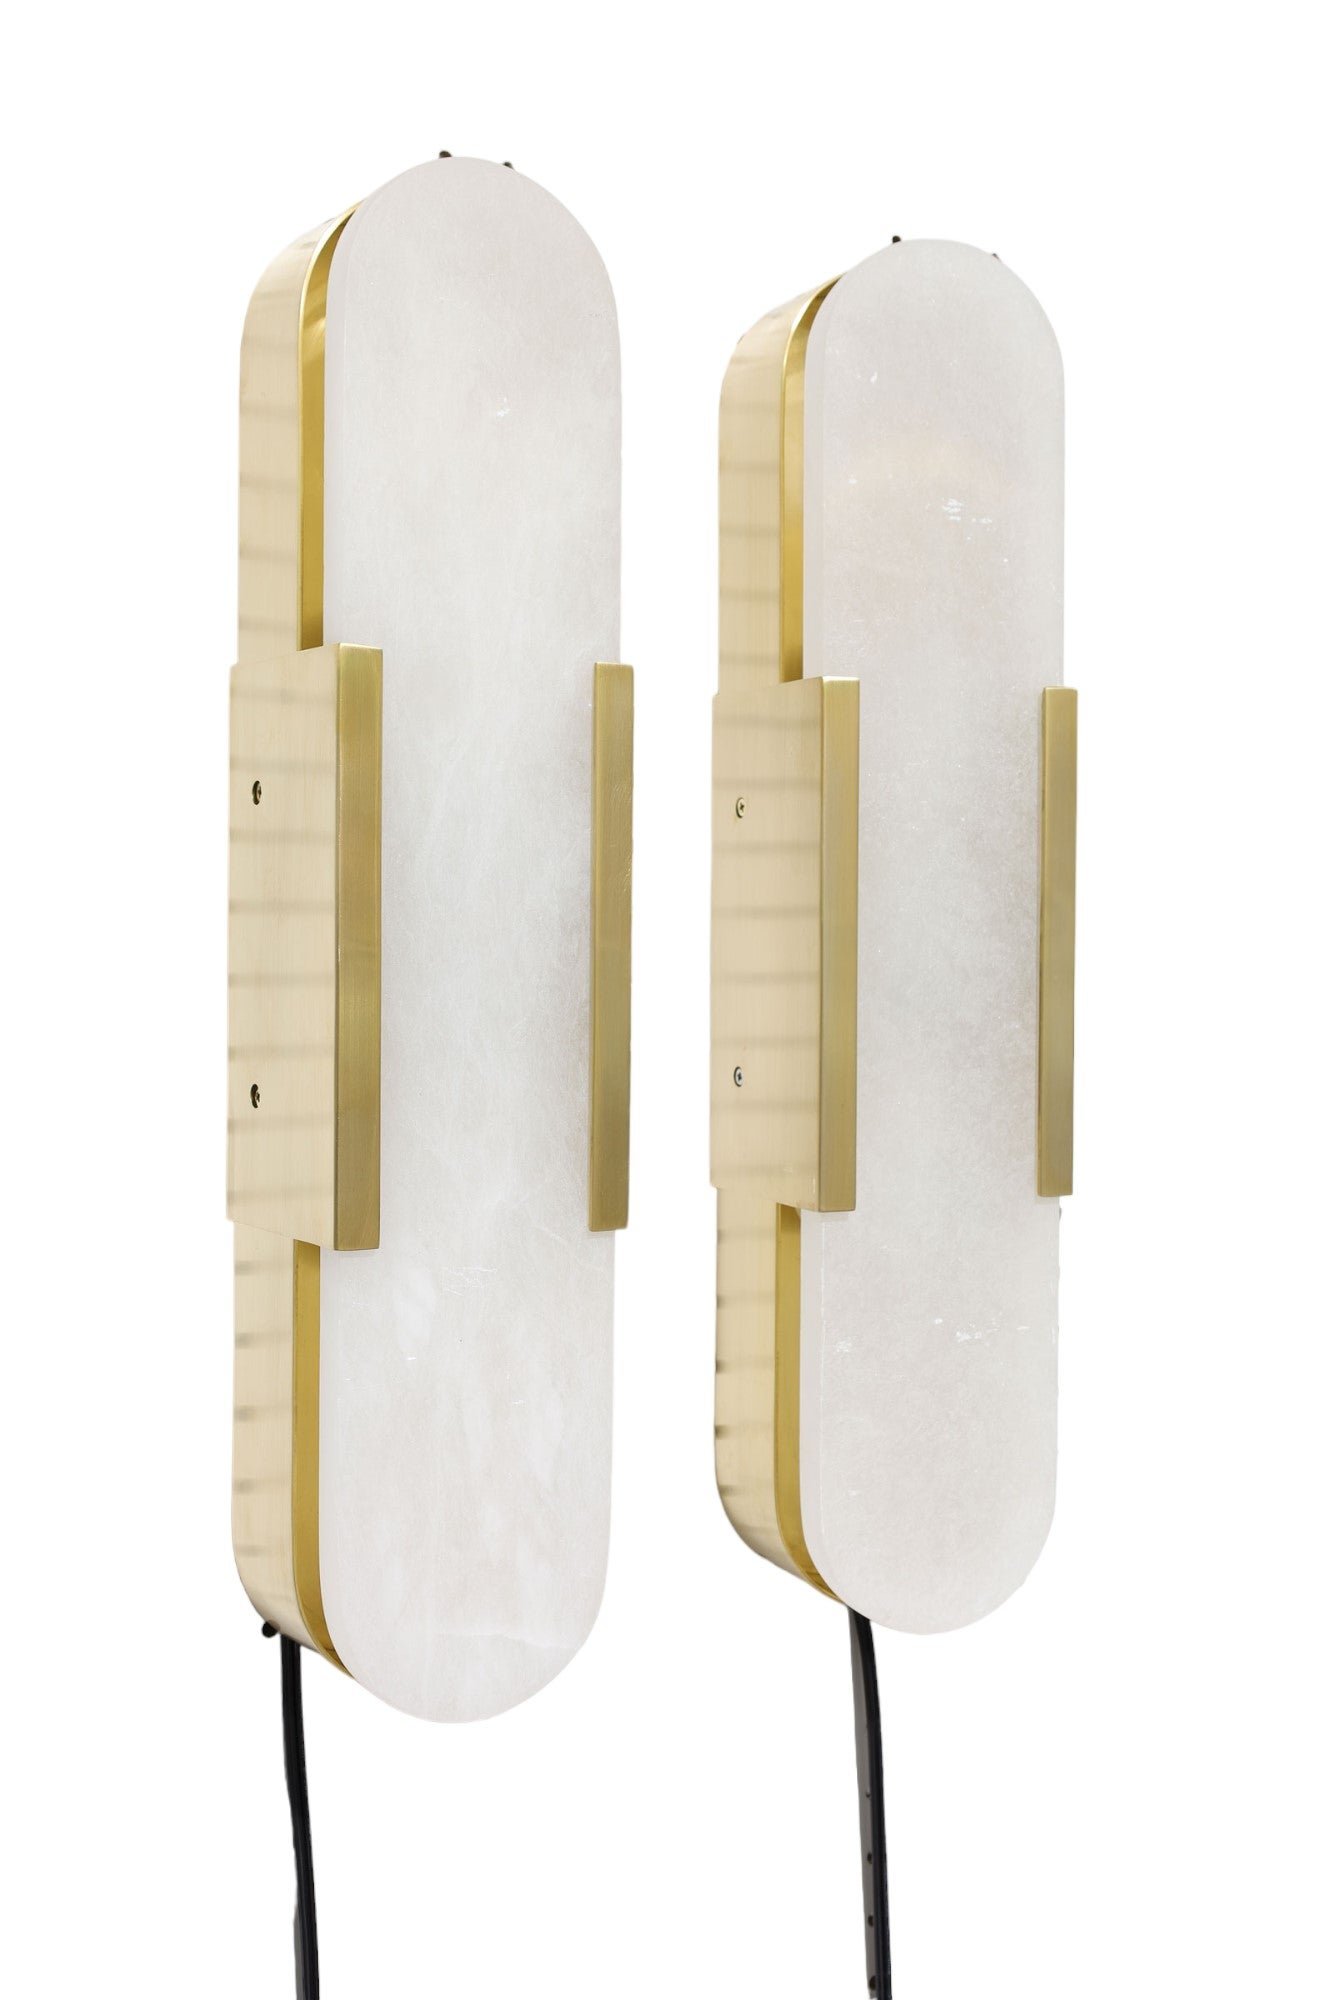 Pairing natural alabaster and sleek metal detailing in a streamlined geometric form, the Melange elongated sconce by Kelly Wearstler is a combination of modern refinement and the beauty of natural stone. This sconce features hand-carved natural